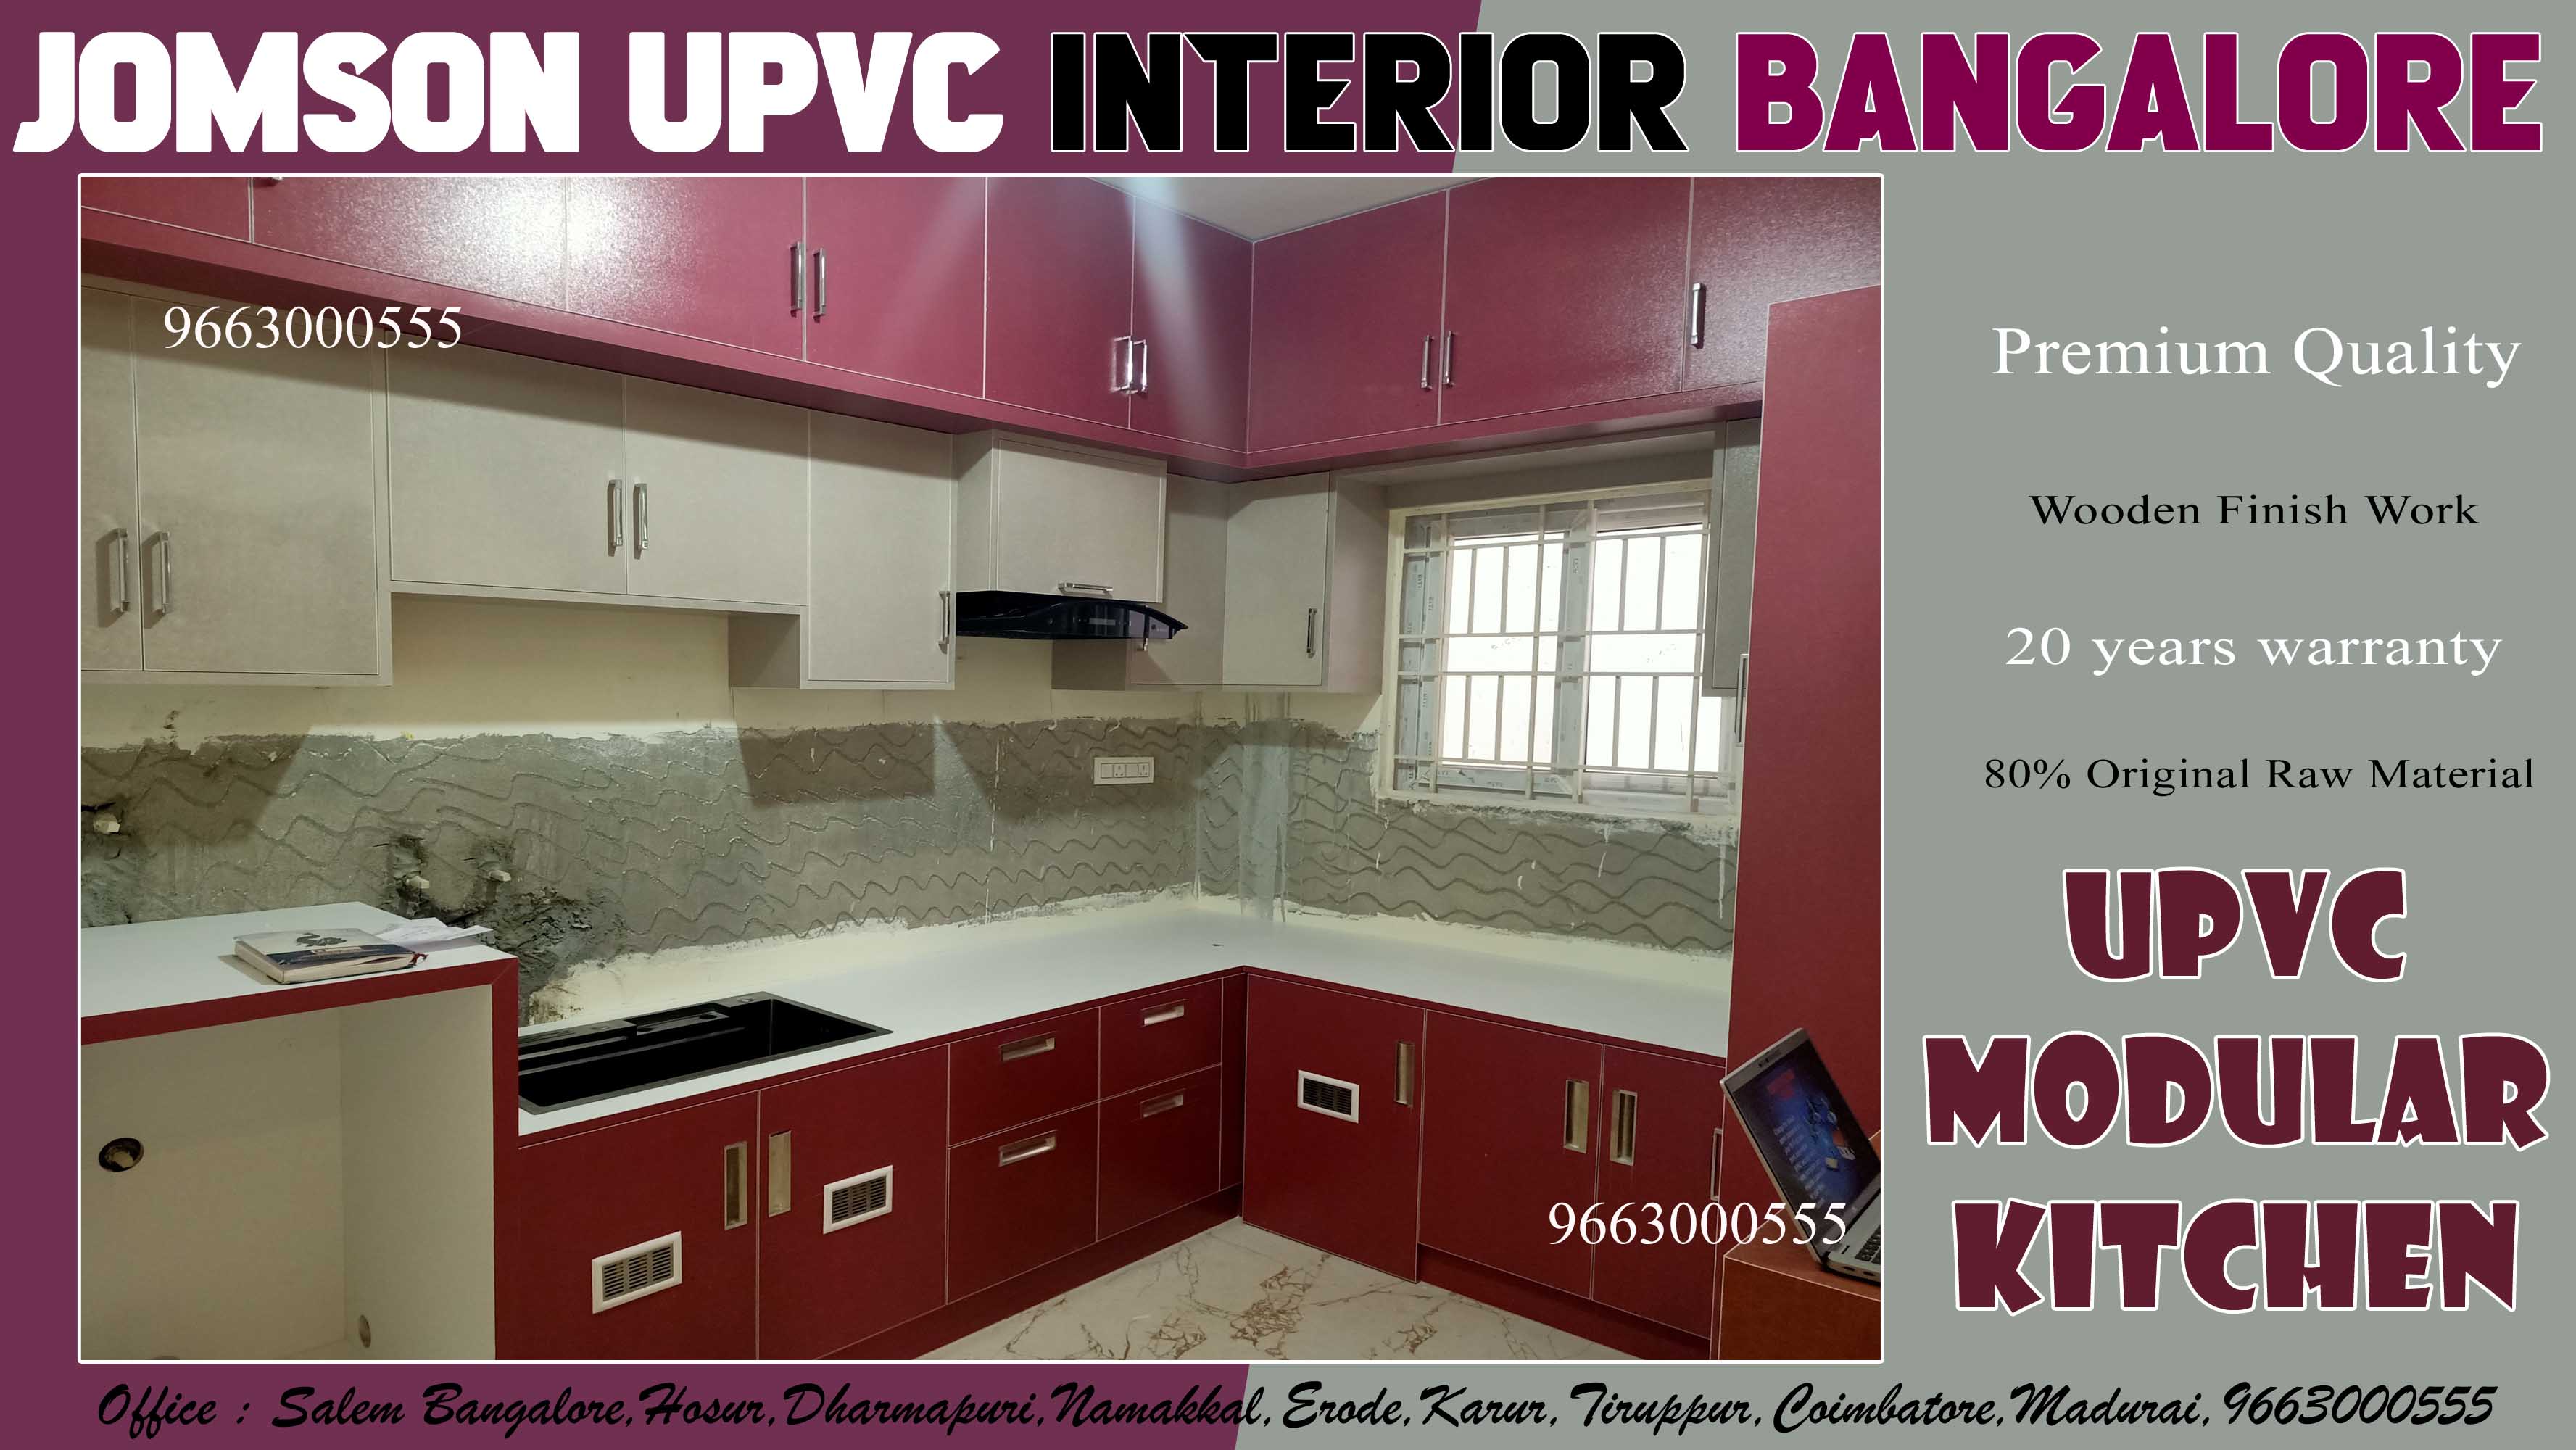 low cost upvc inteirors in bangalore